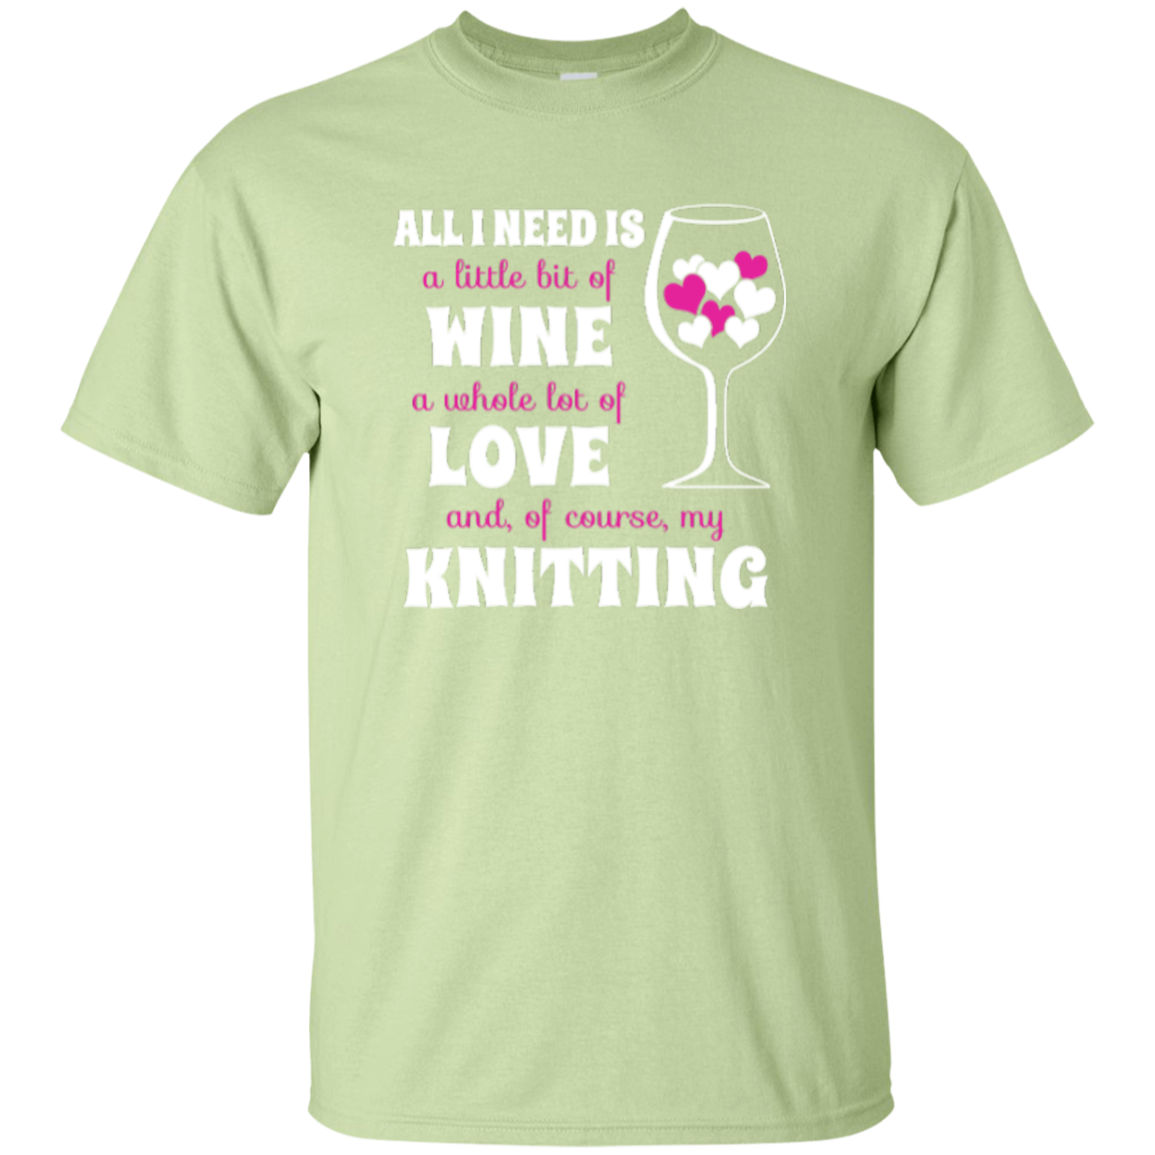 All I Need is Wine-Love-Knitting Custom Ultra Cotton T-Shirt - Crafter4Life - 9